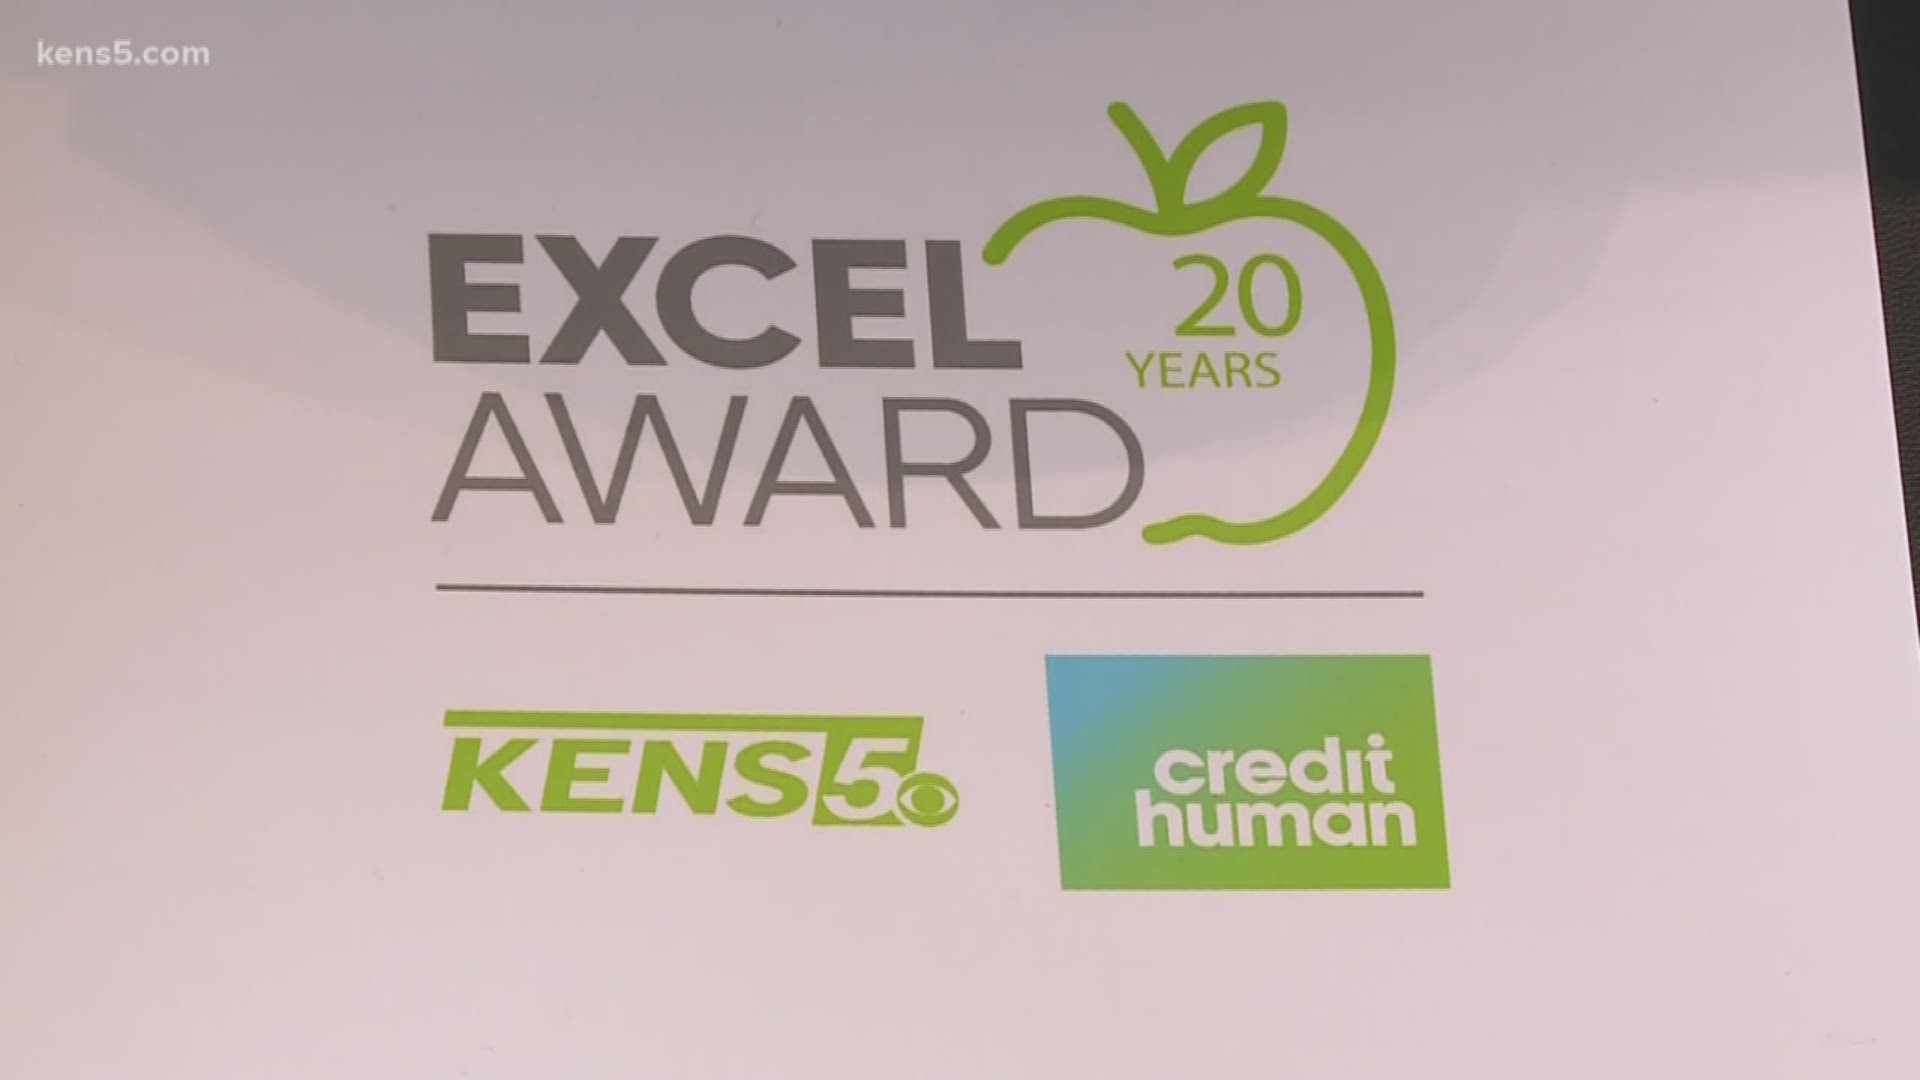 Winners of the KENS 5 Credit Human EXCEL Award were honored tonight at a dinner at the Doseum. Each teacher received a check for $1,000 during this school year.